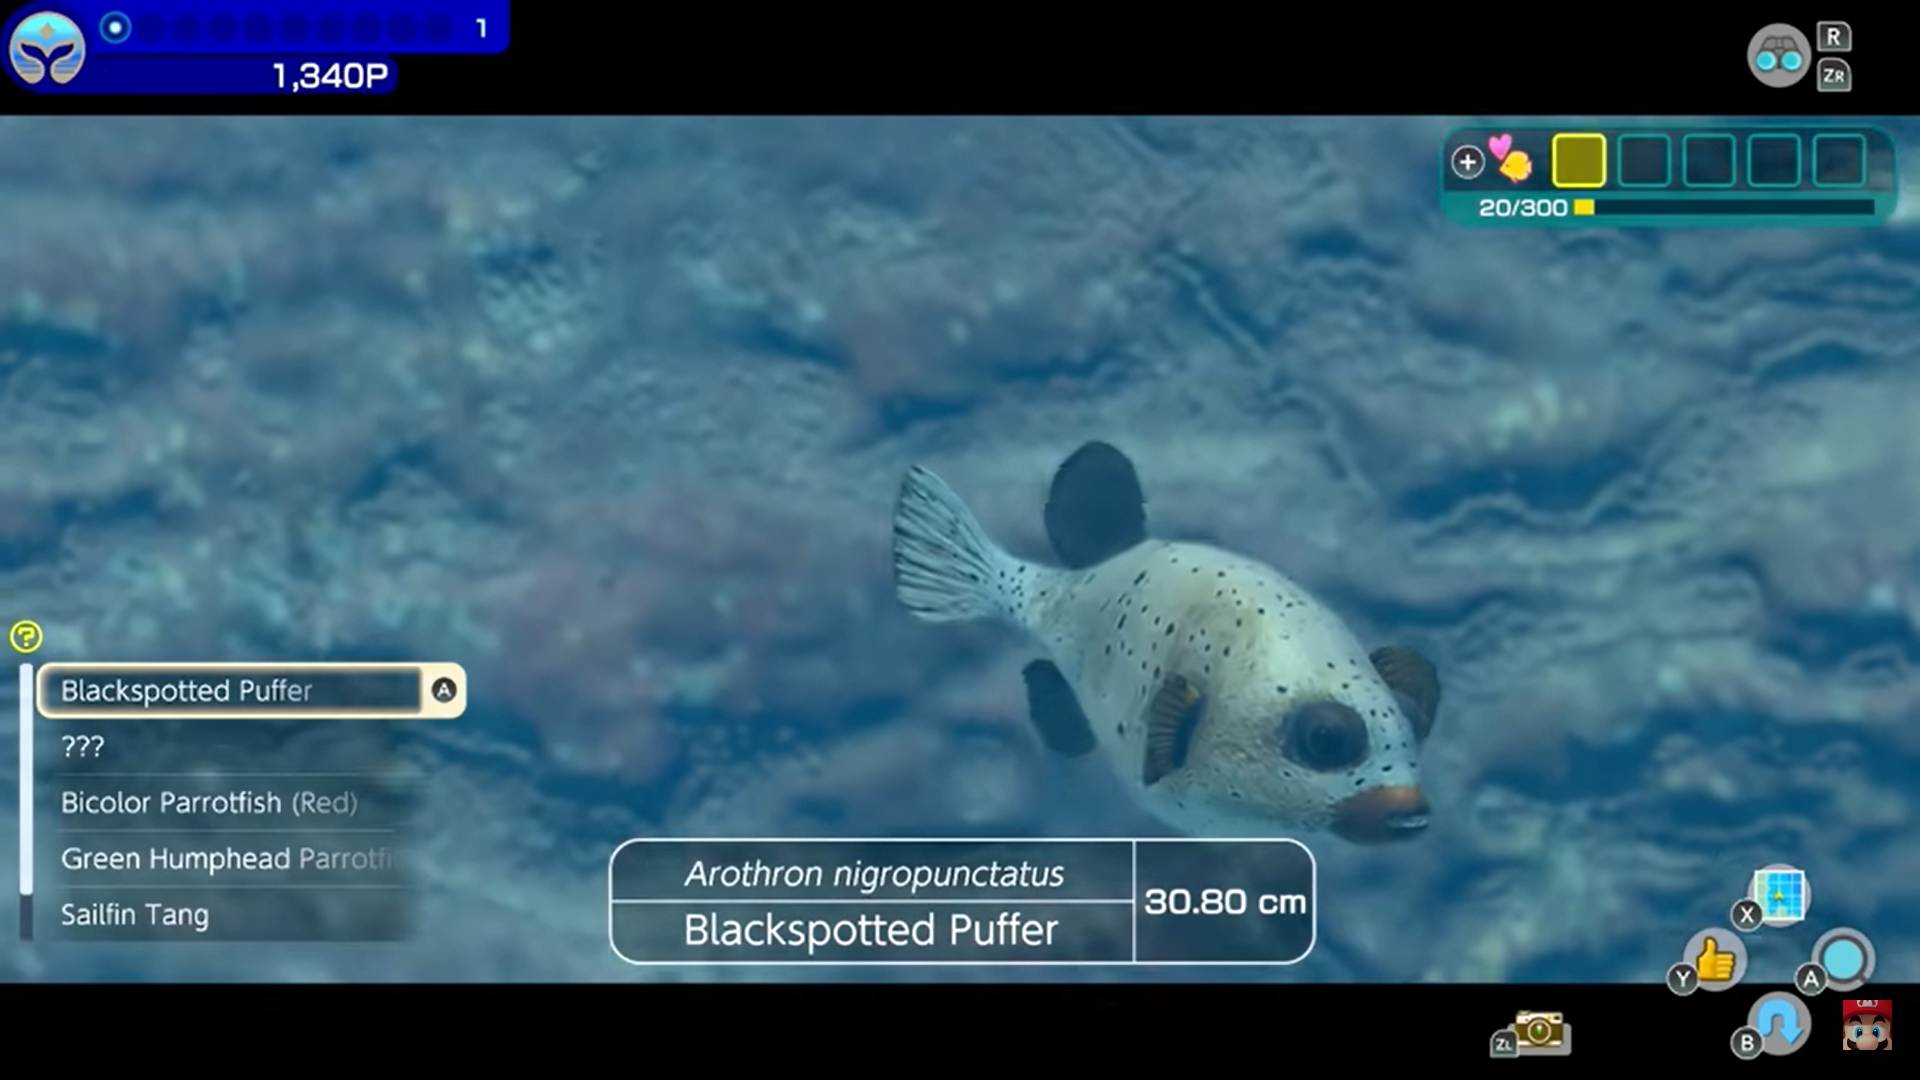 A screenshot of the Endless Ocean Luminous title screen from Nintendo of American's official overview trailer upload. It shows a Blackspotted Puffer fish swimming near the ocean floor with information about the fish - including its name and size.